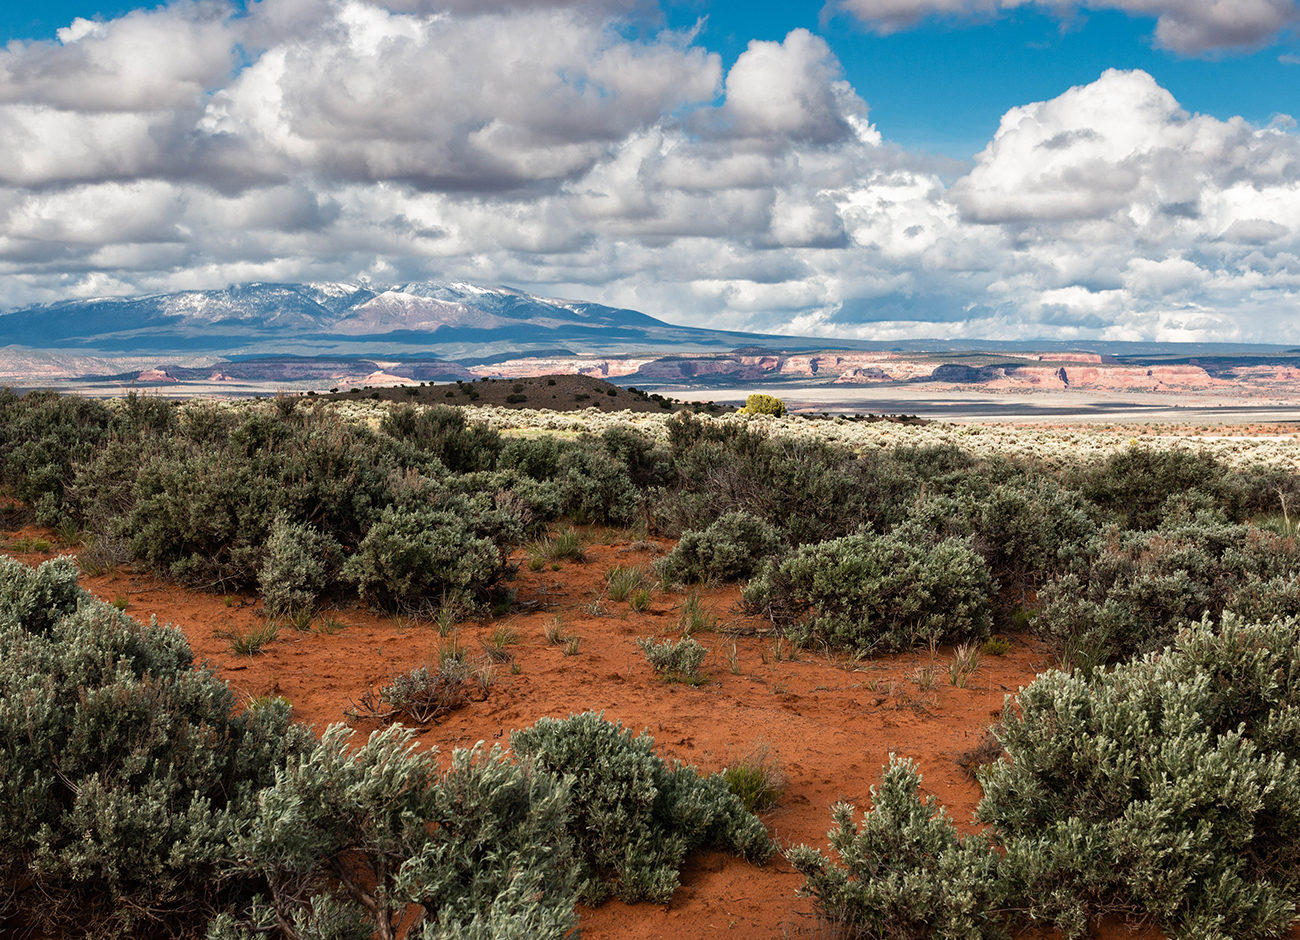 Puffy clouds over Canyonlands National Park.